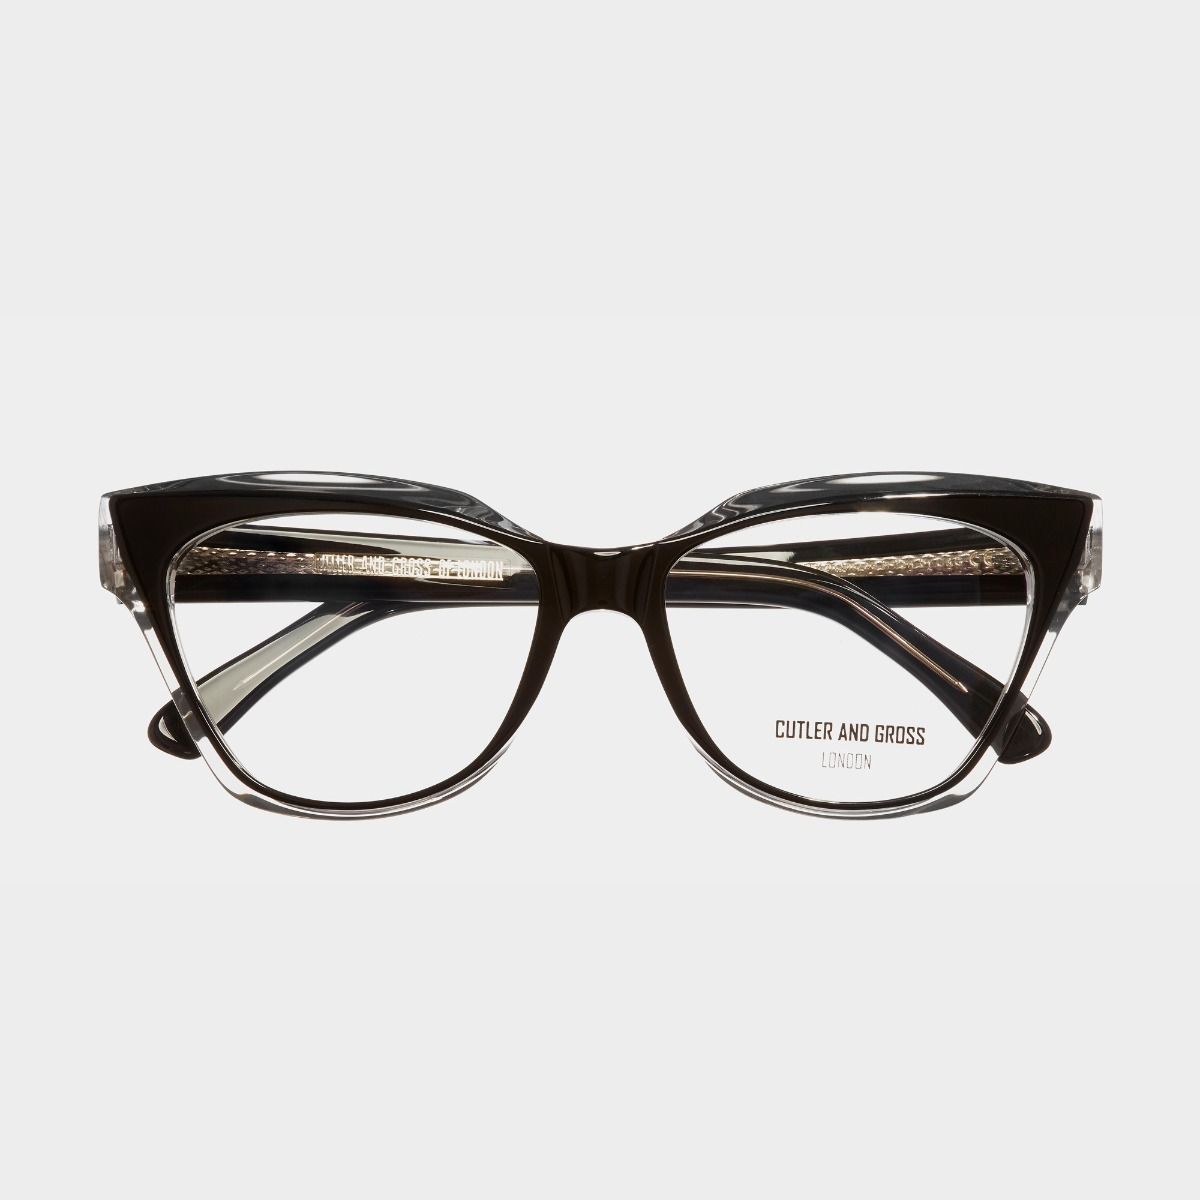 Cutler and Gross, 1288 Optical Cat Eye Glasses - Black on Crystal 